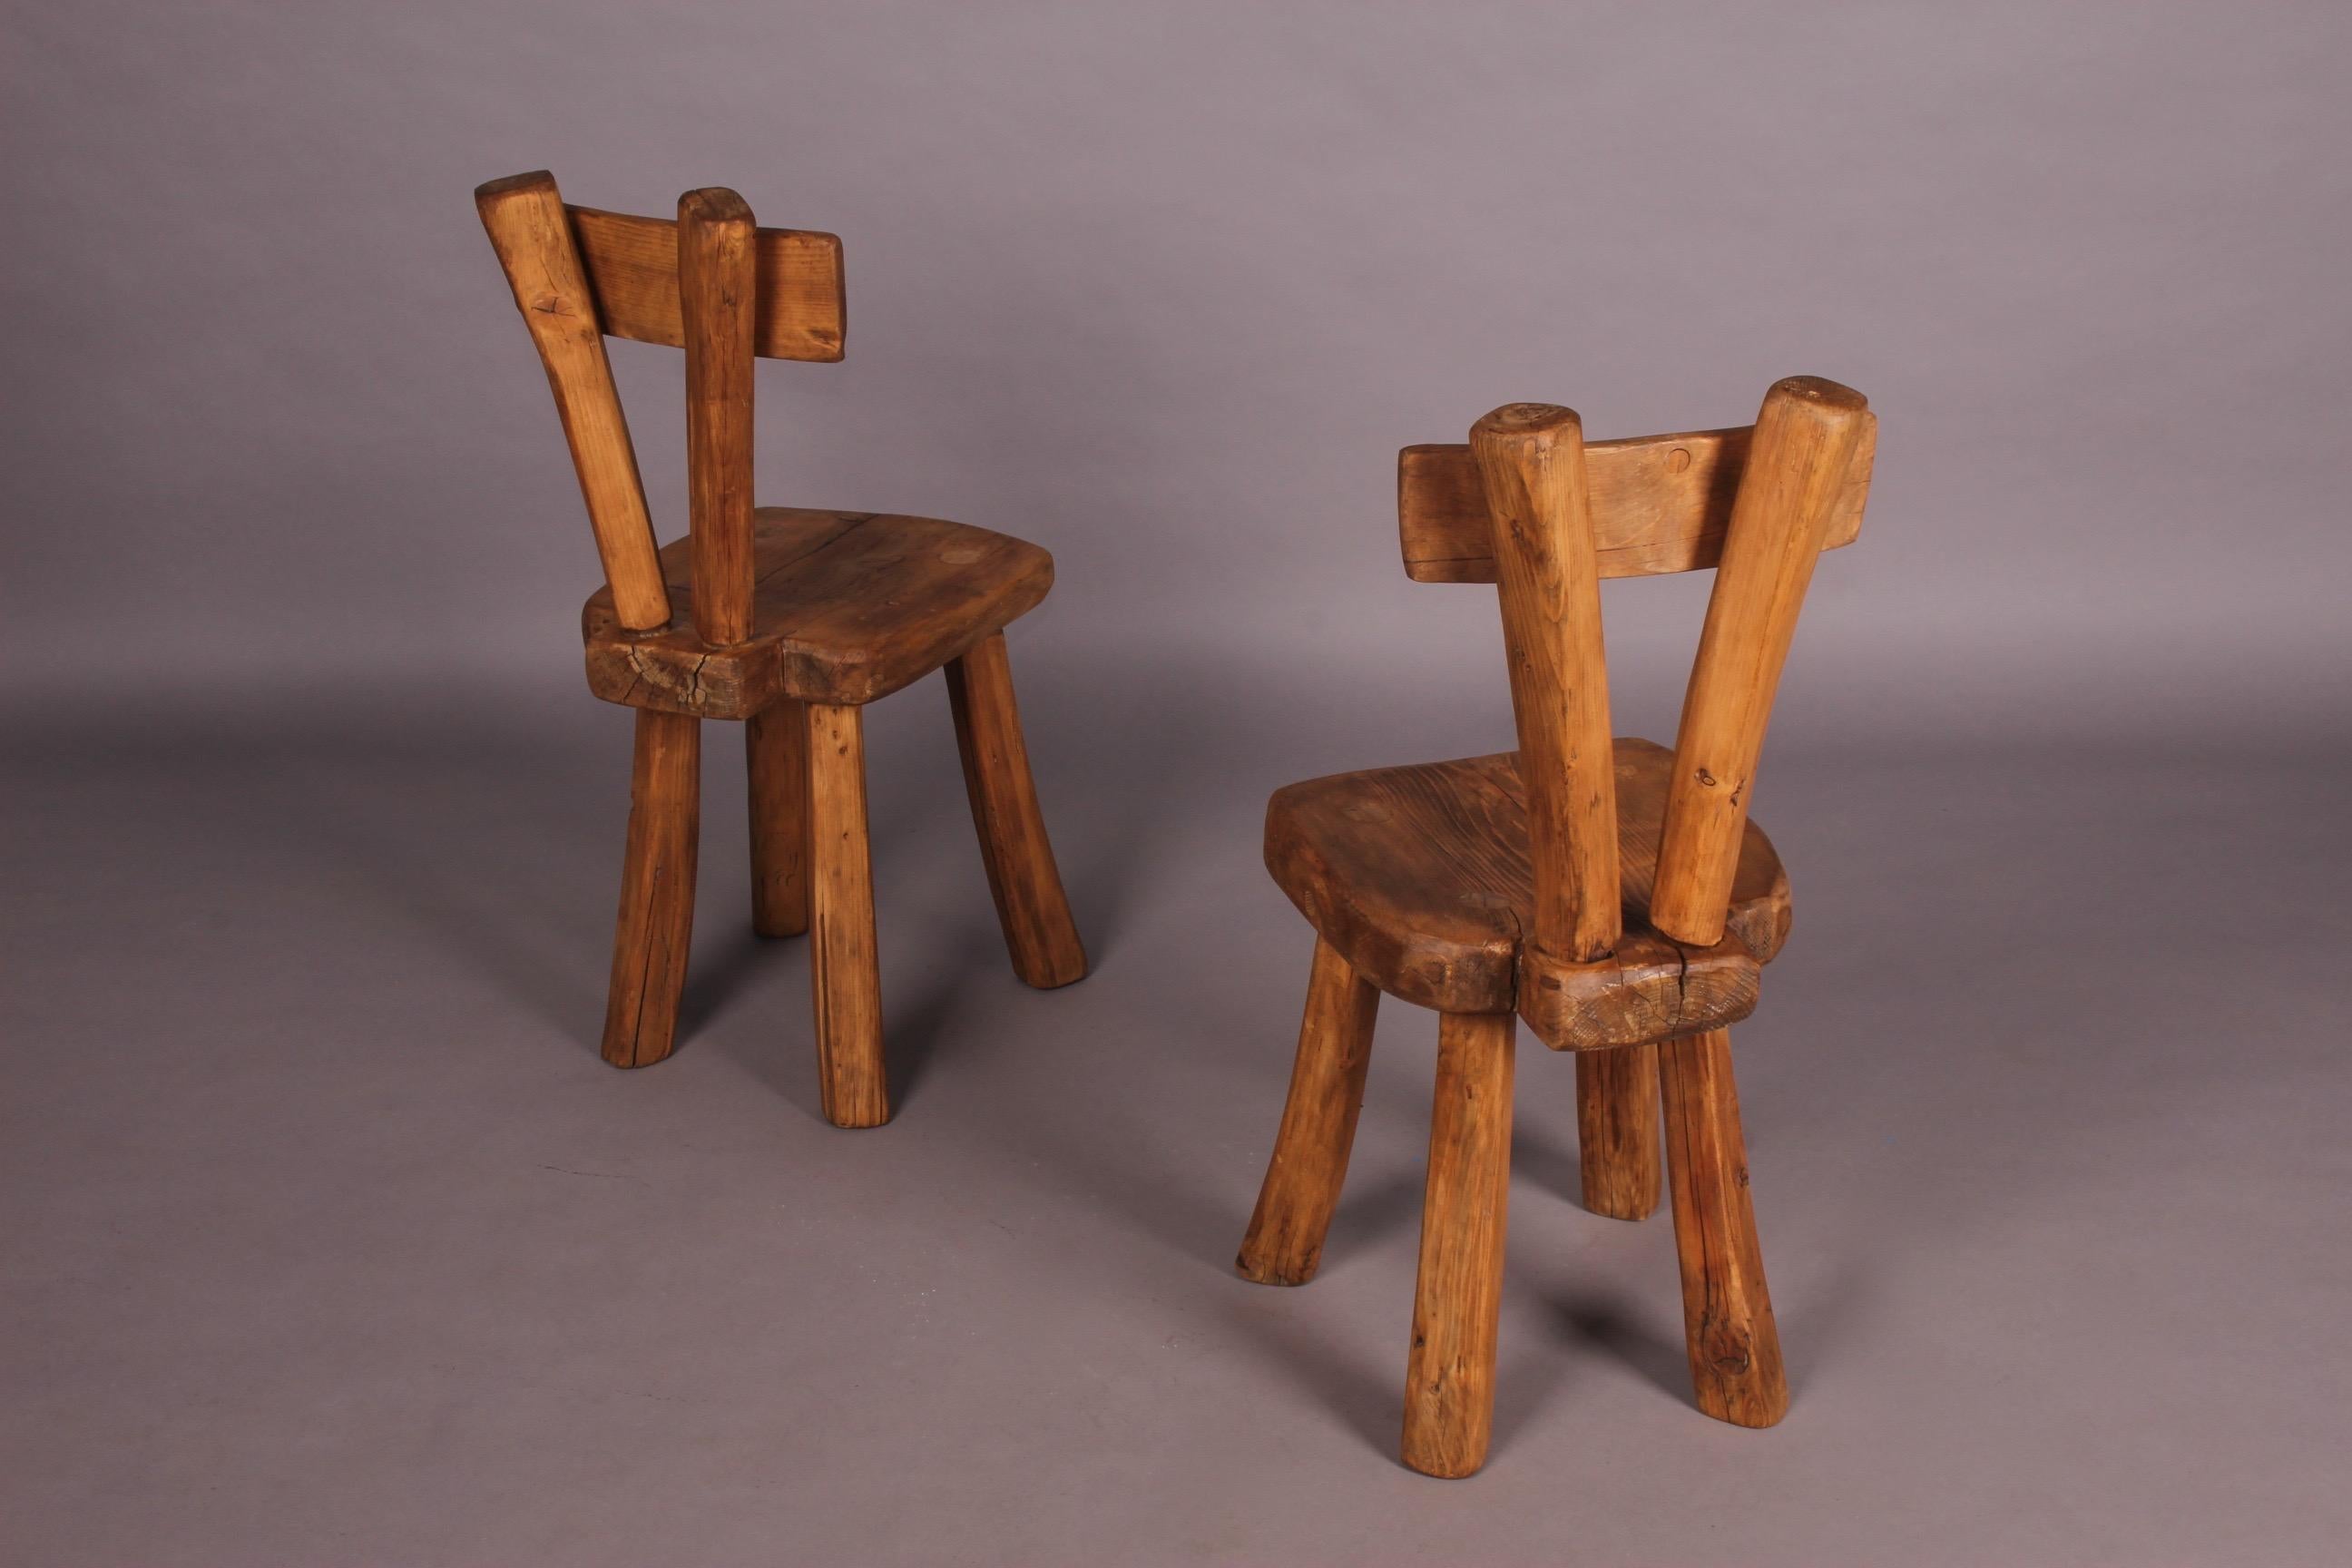 Two Alexandre Noll style chairs, the place of the chair is restore.